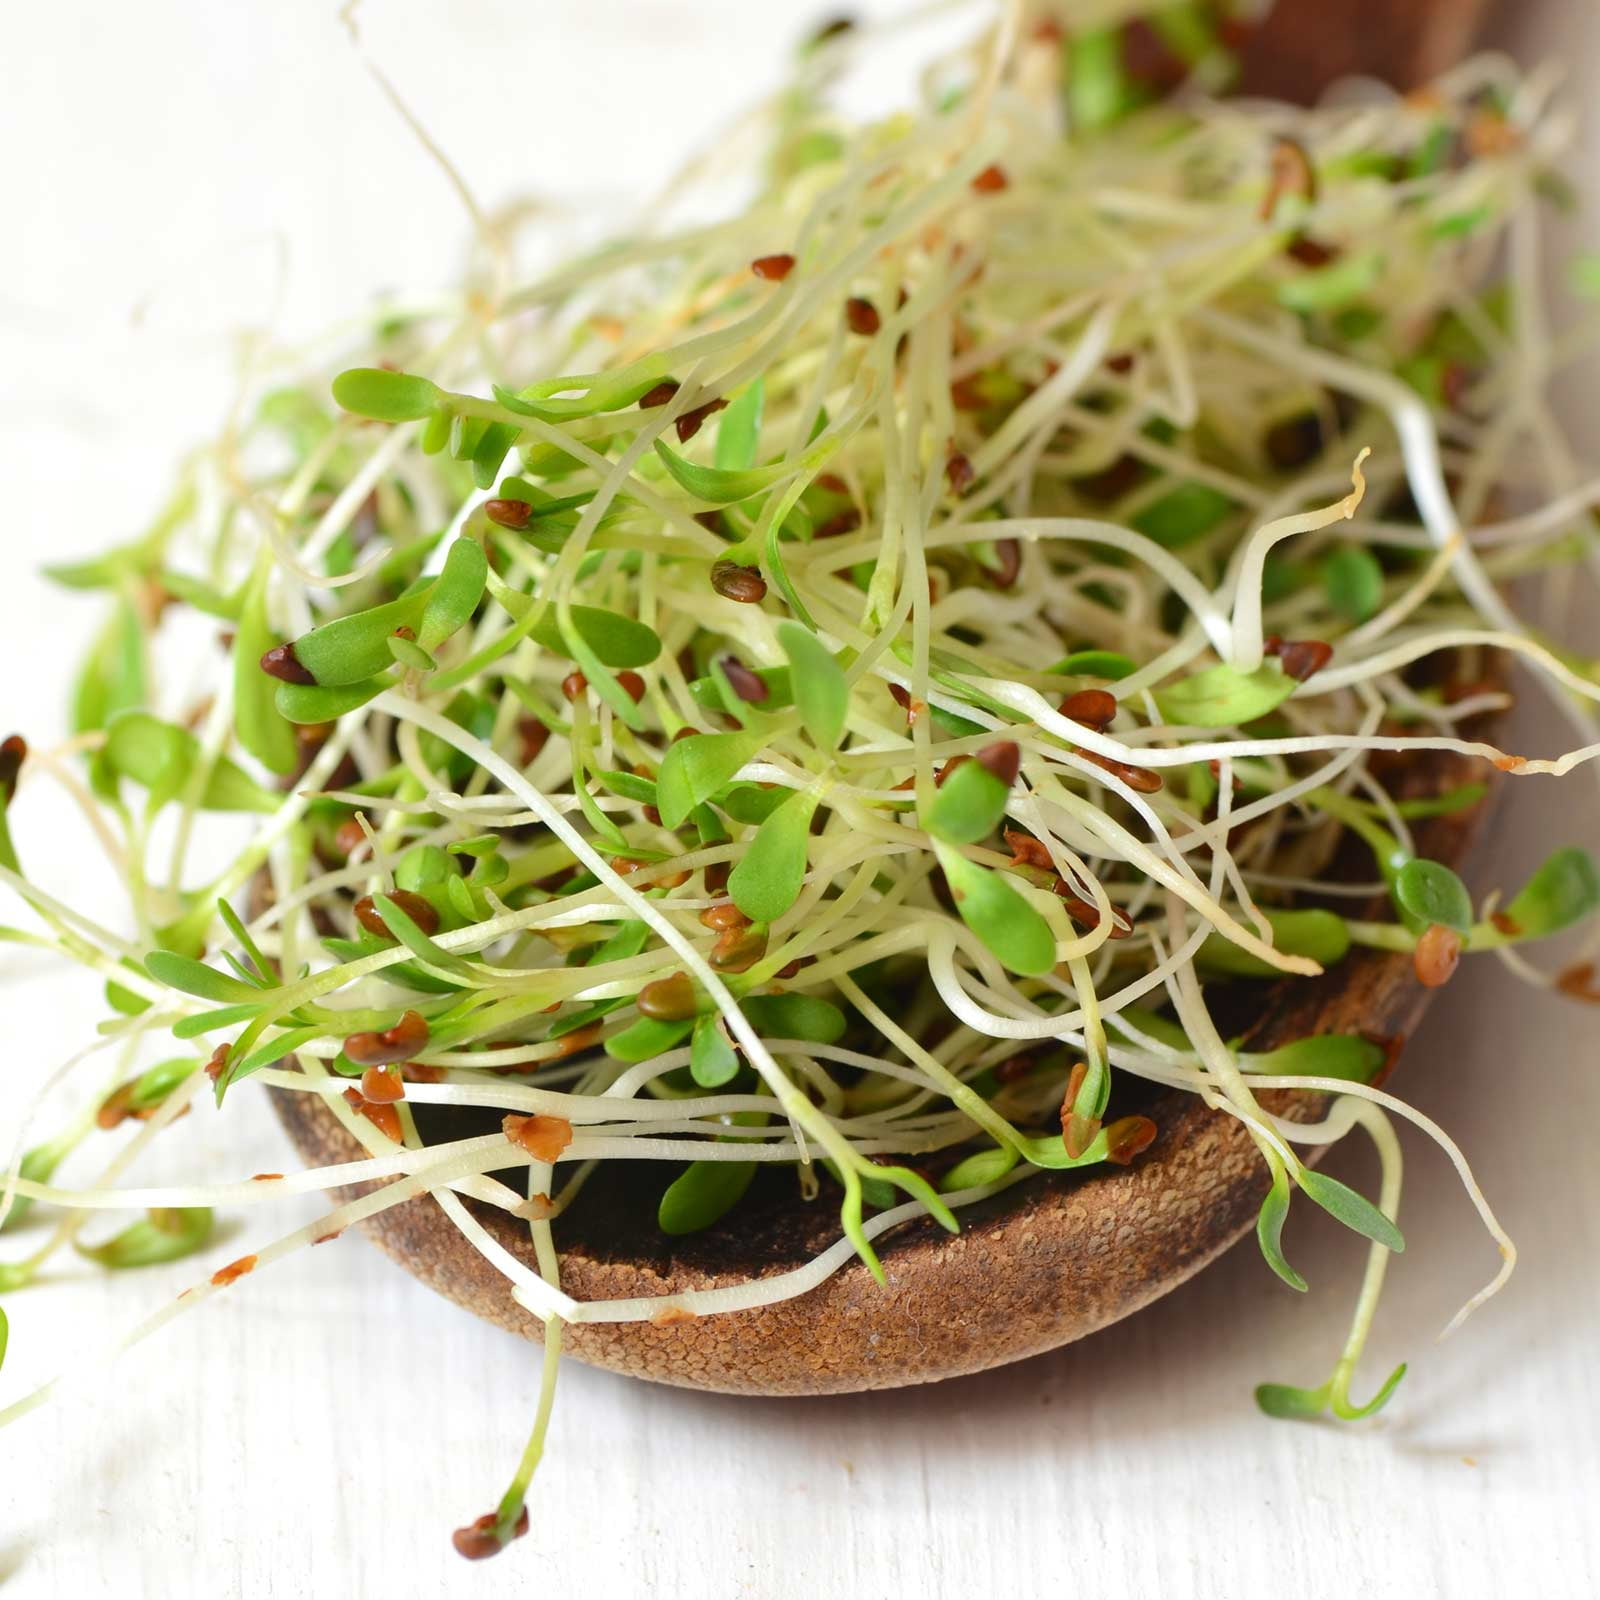 Organic Alfalfa Seeds Certified Sprouts Microgreens Lucerne FREE SHIPPING